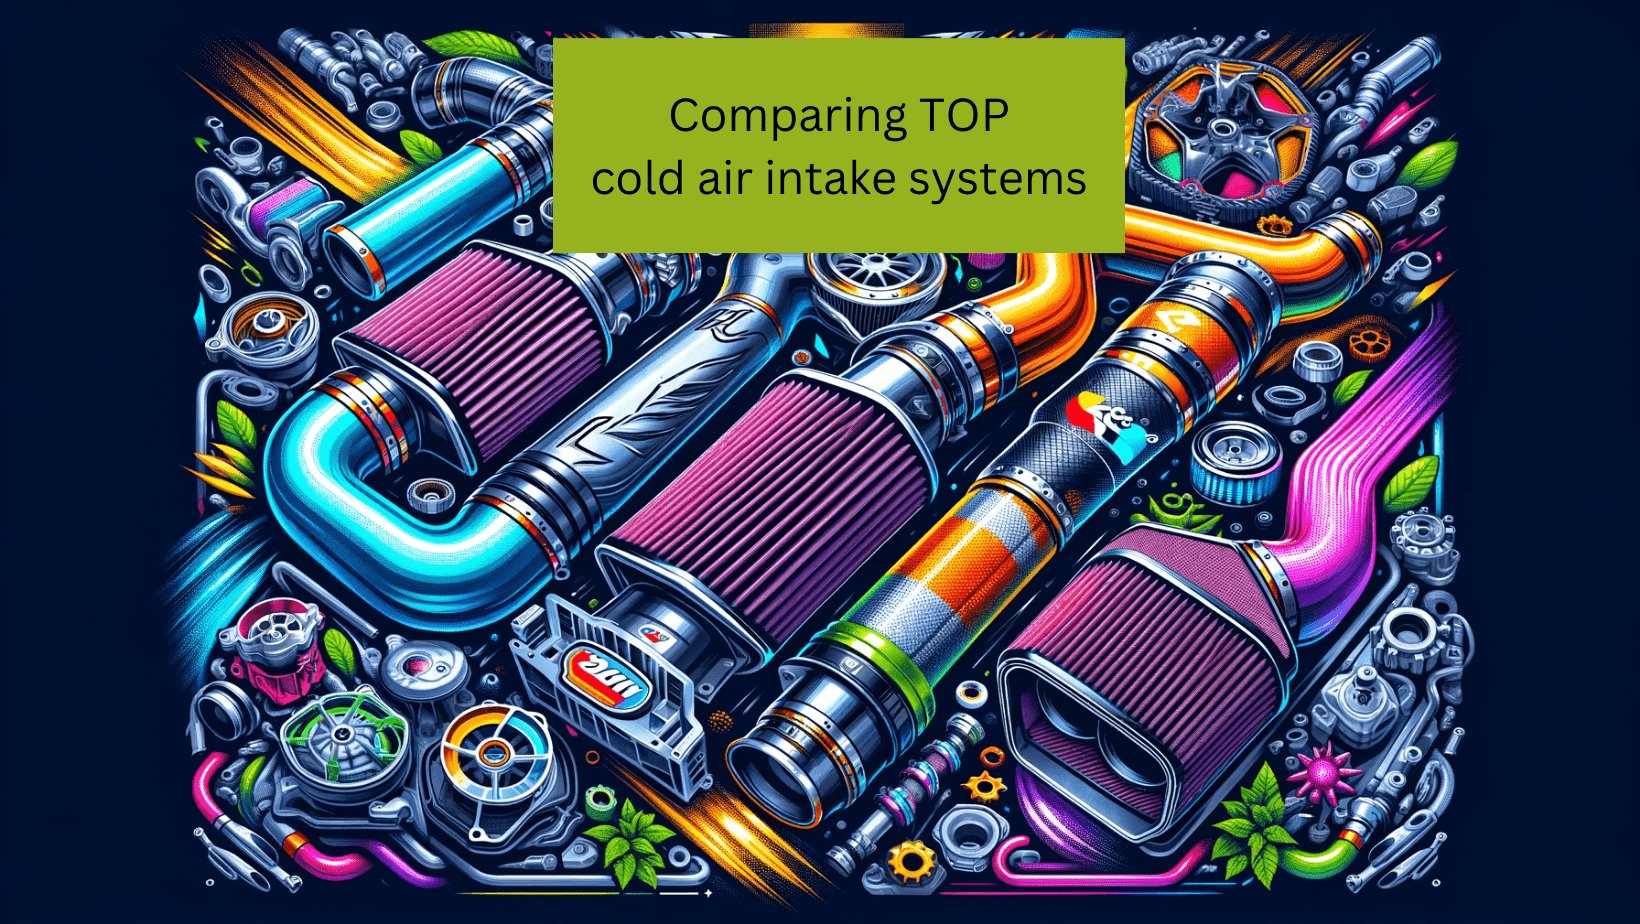 cold air intake brand comparsions are here